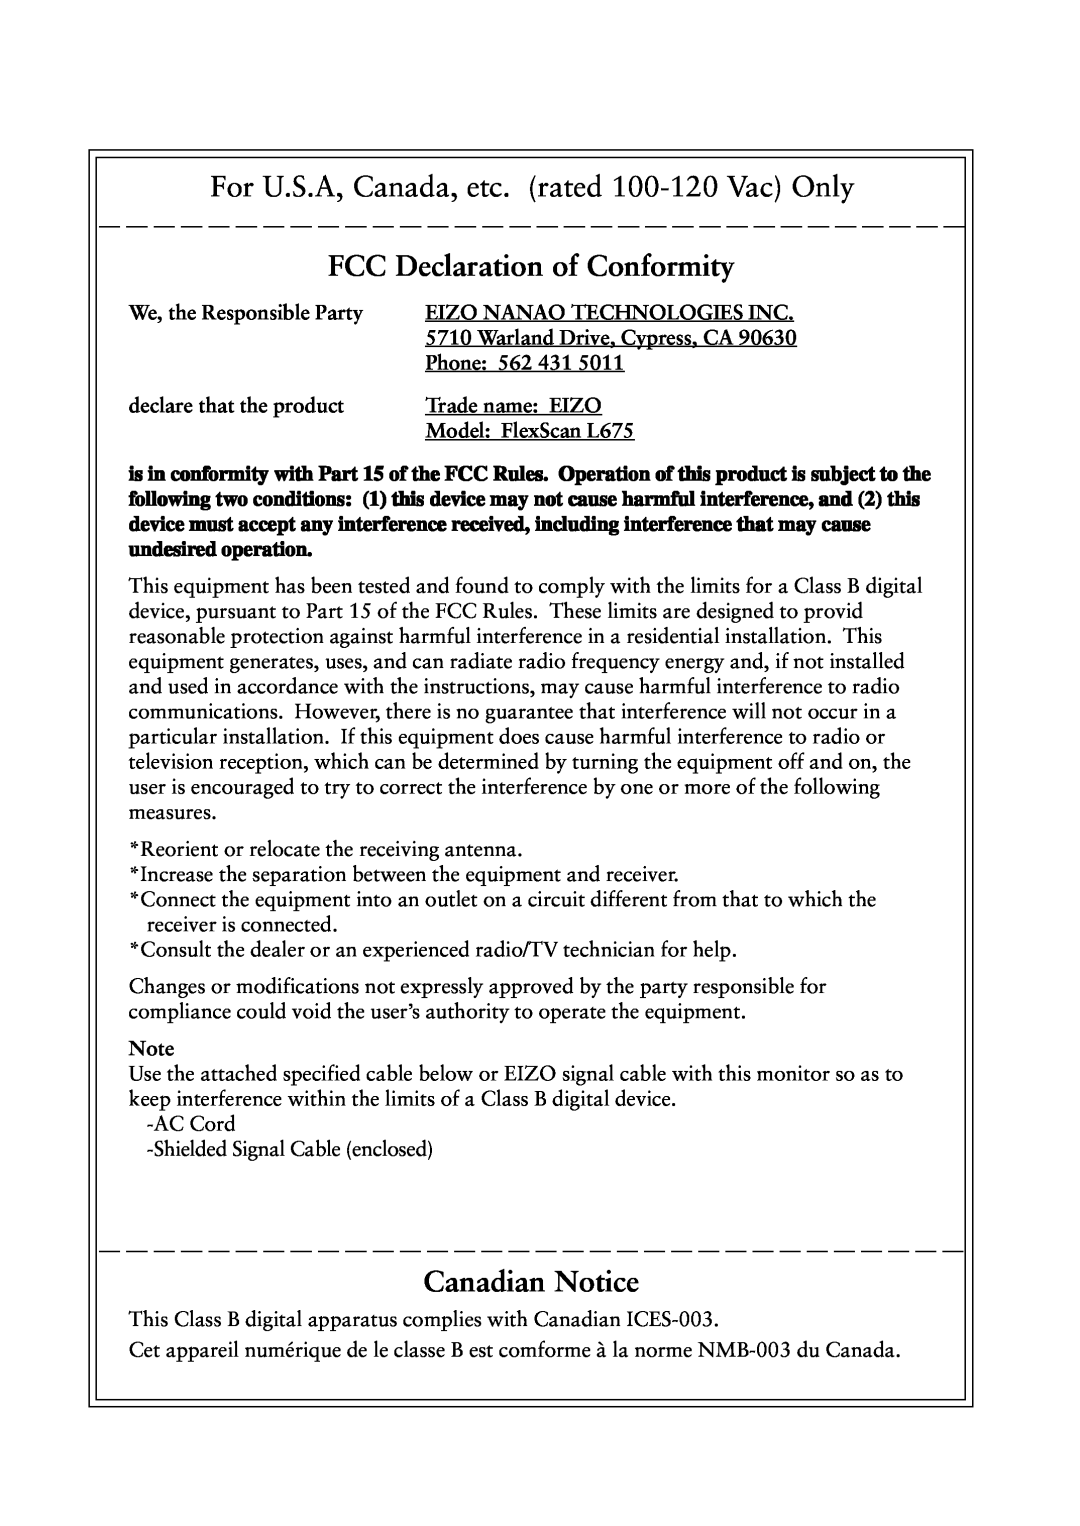 Eizo FlexScan L675 manual For U.S.A, Canada, etc. rated 100-120 Vac Only, FCC Declaration of Conformity, Canadian Notice 